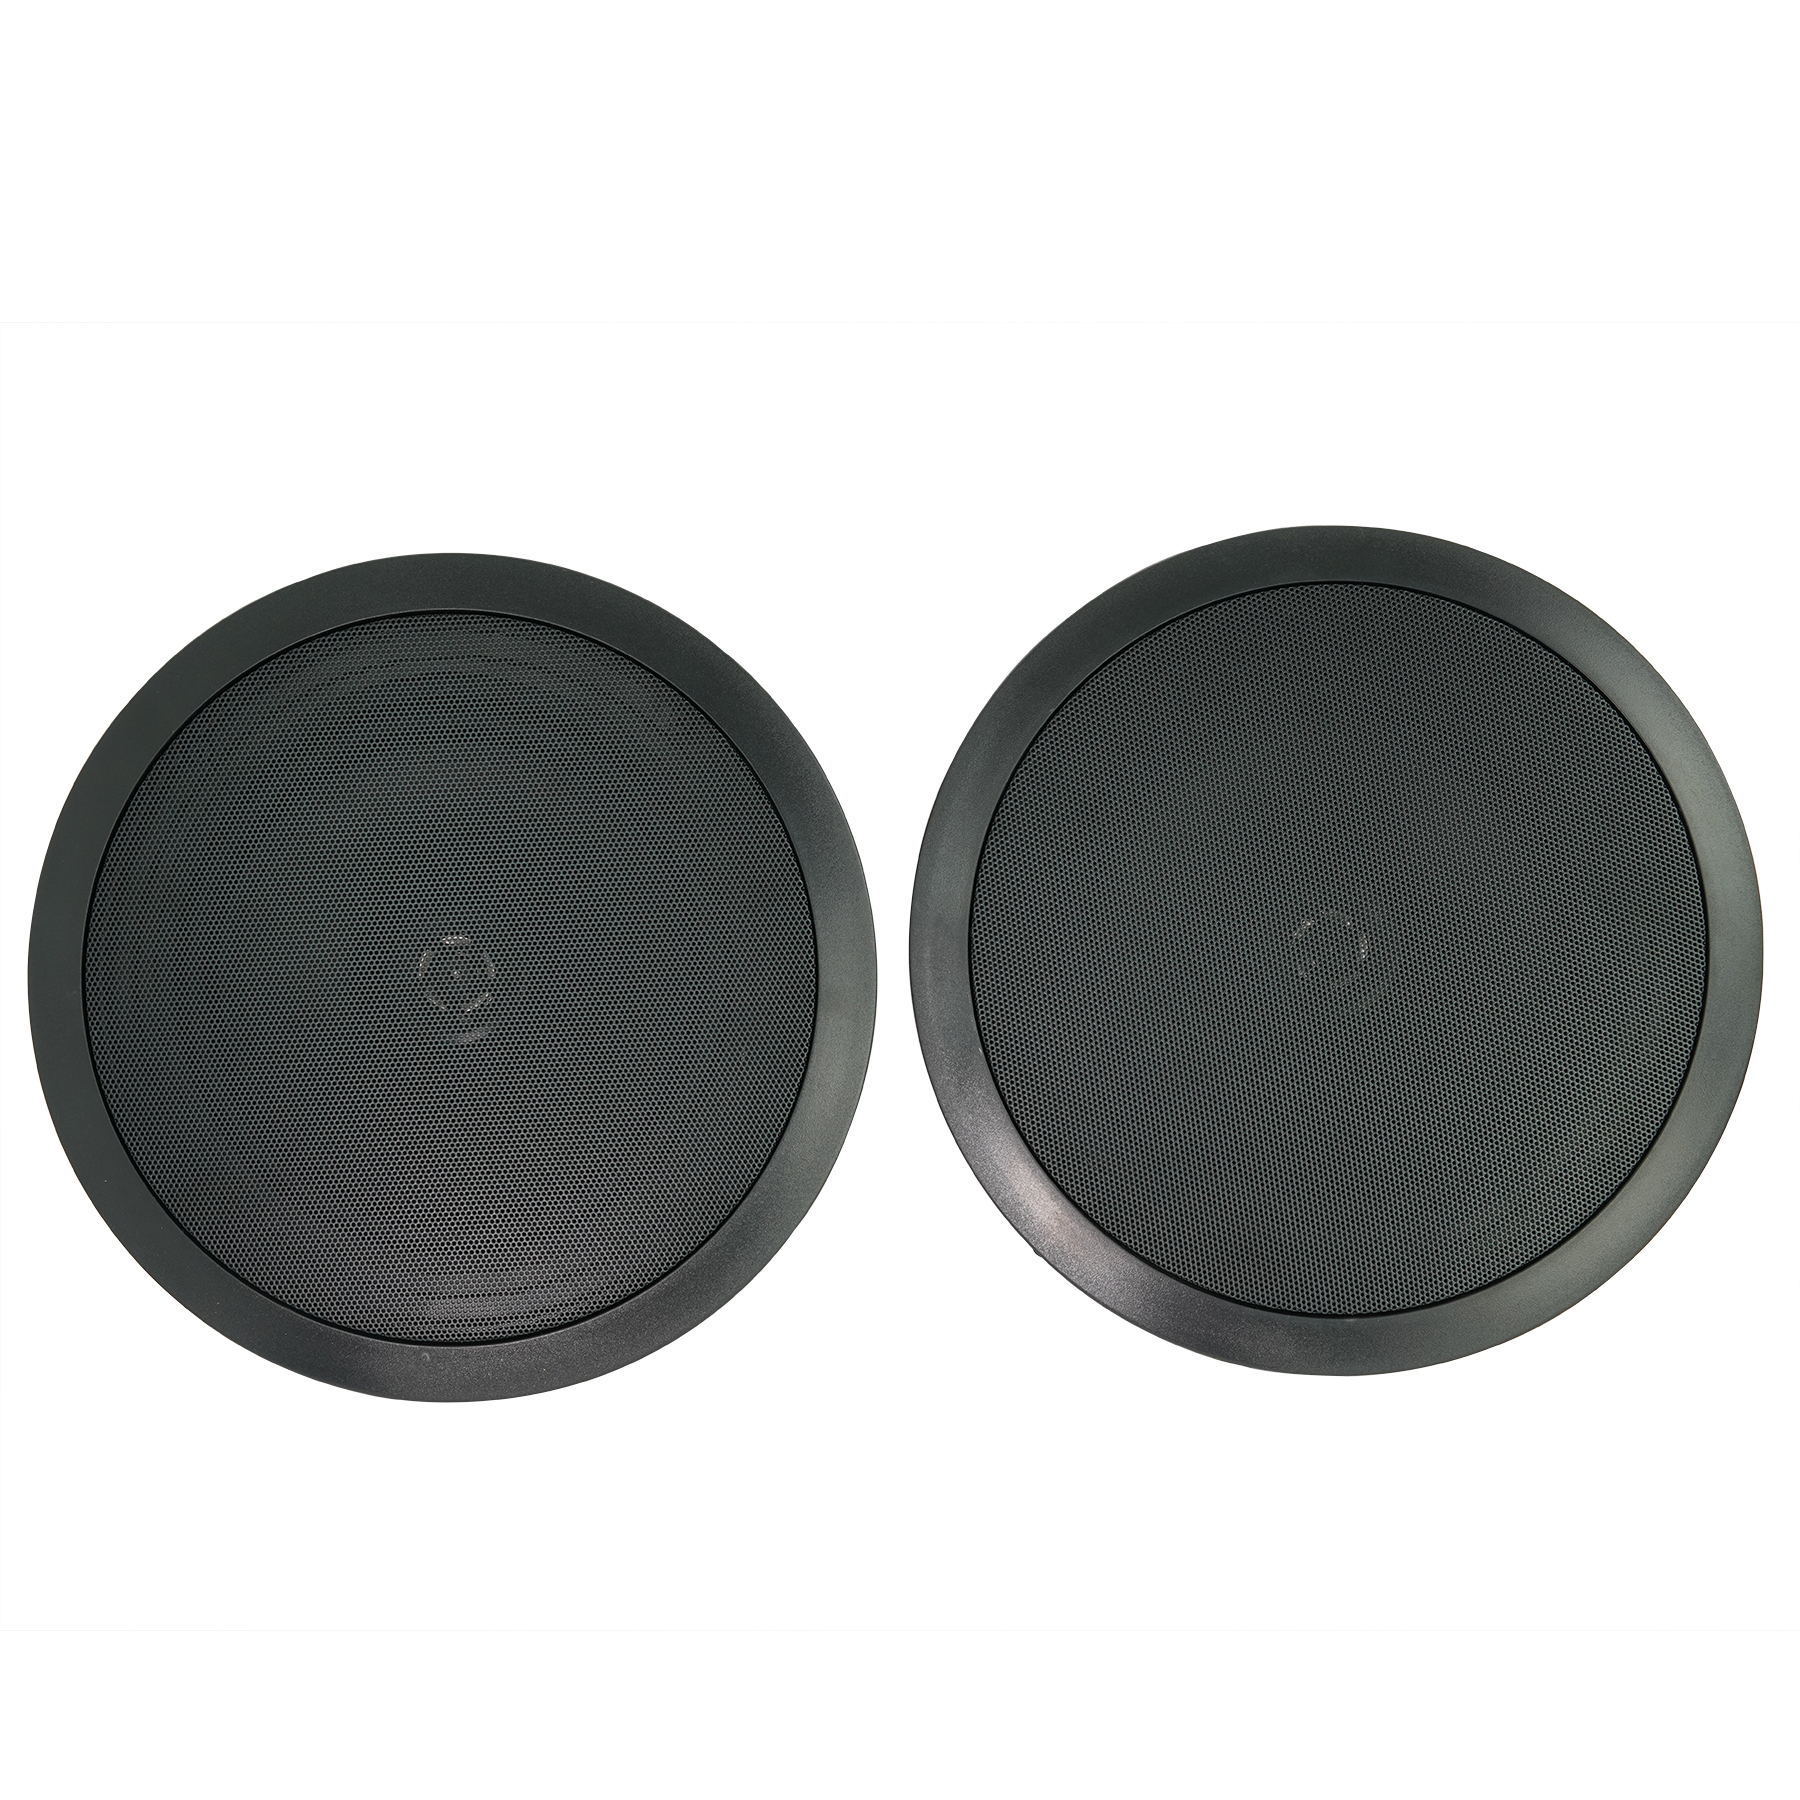 Rockville Commercial Receiver+(12) 8" 2Way Black Ceiling Speakers 4 Hotel/Office - image 5 of 5